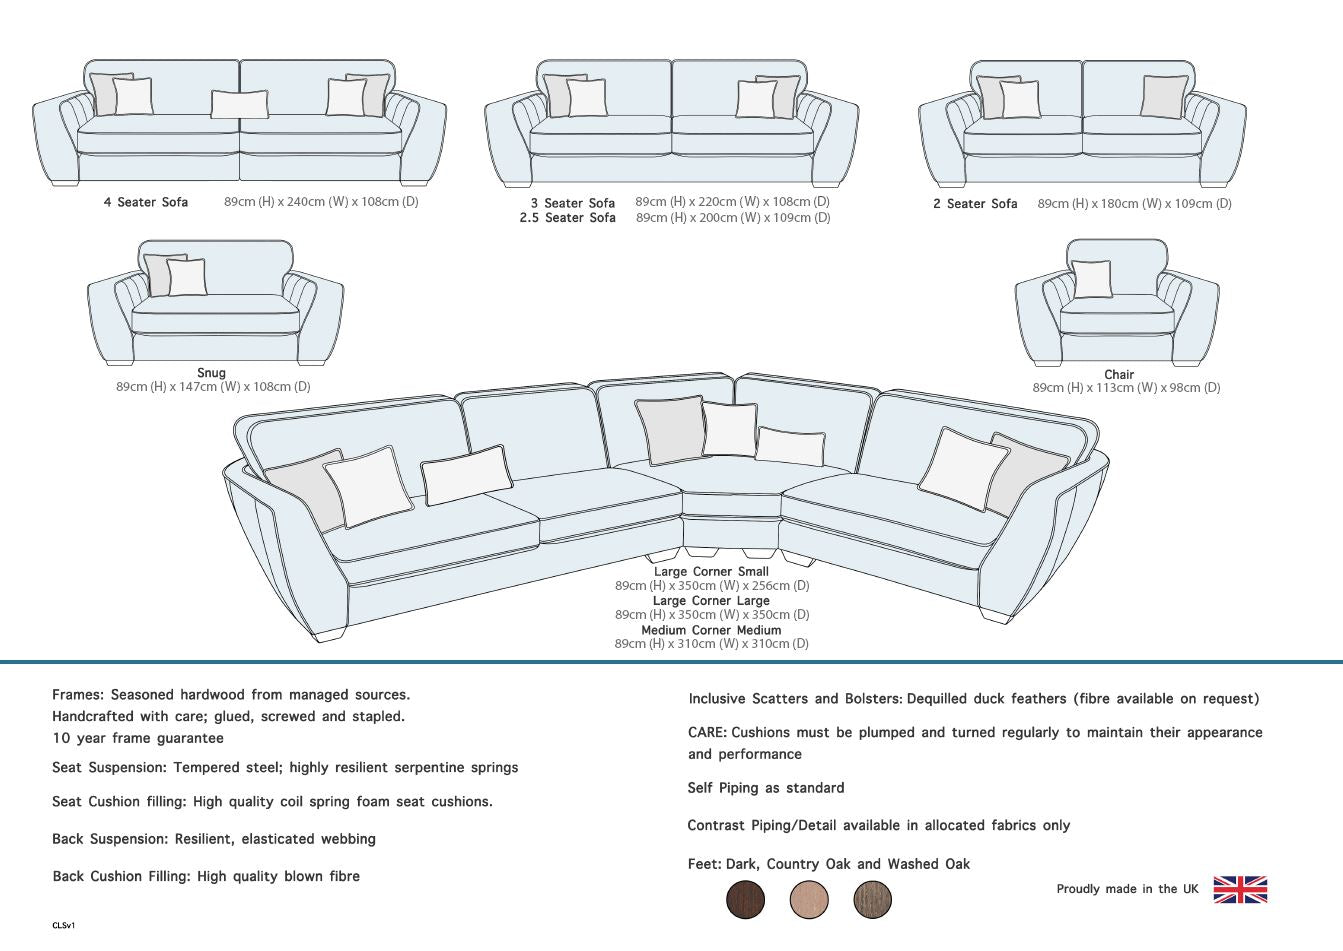 Carson 2 Seater Sofa Contrast Piping